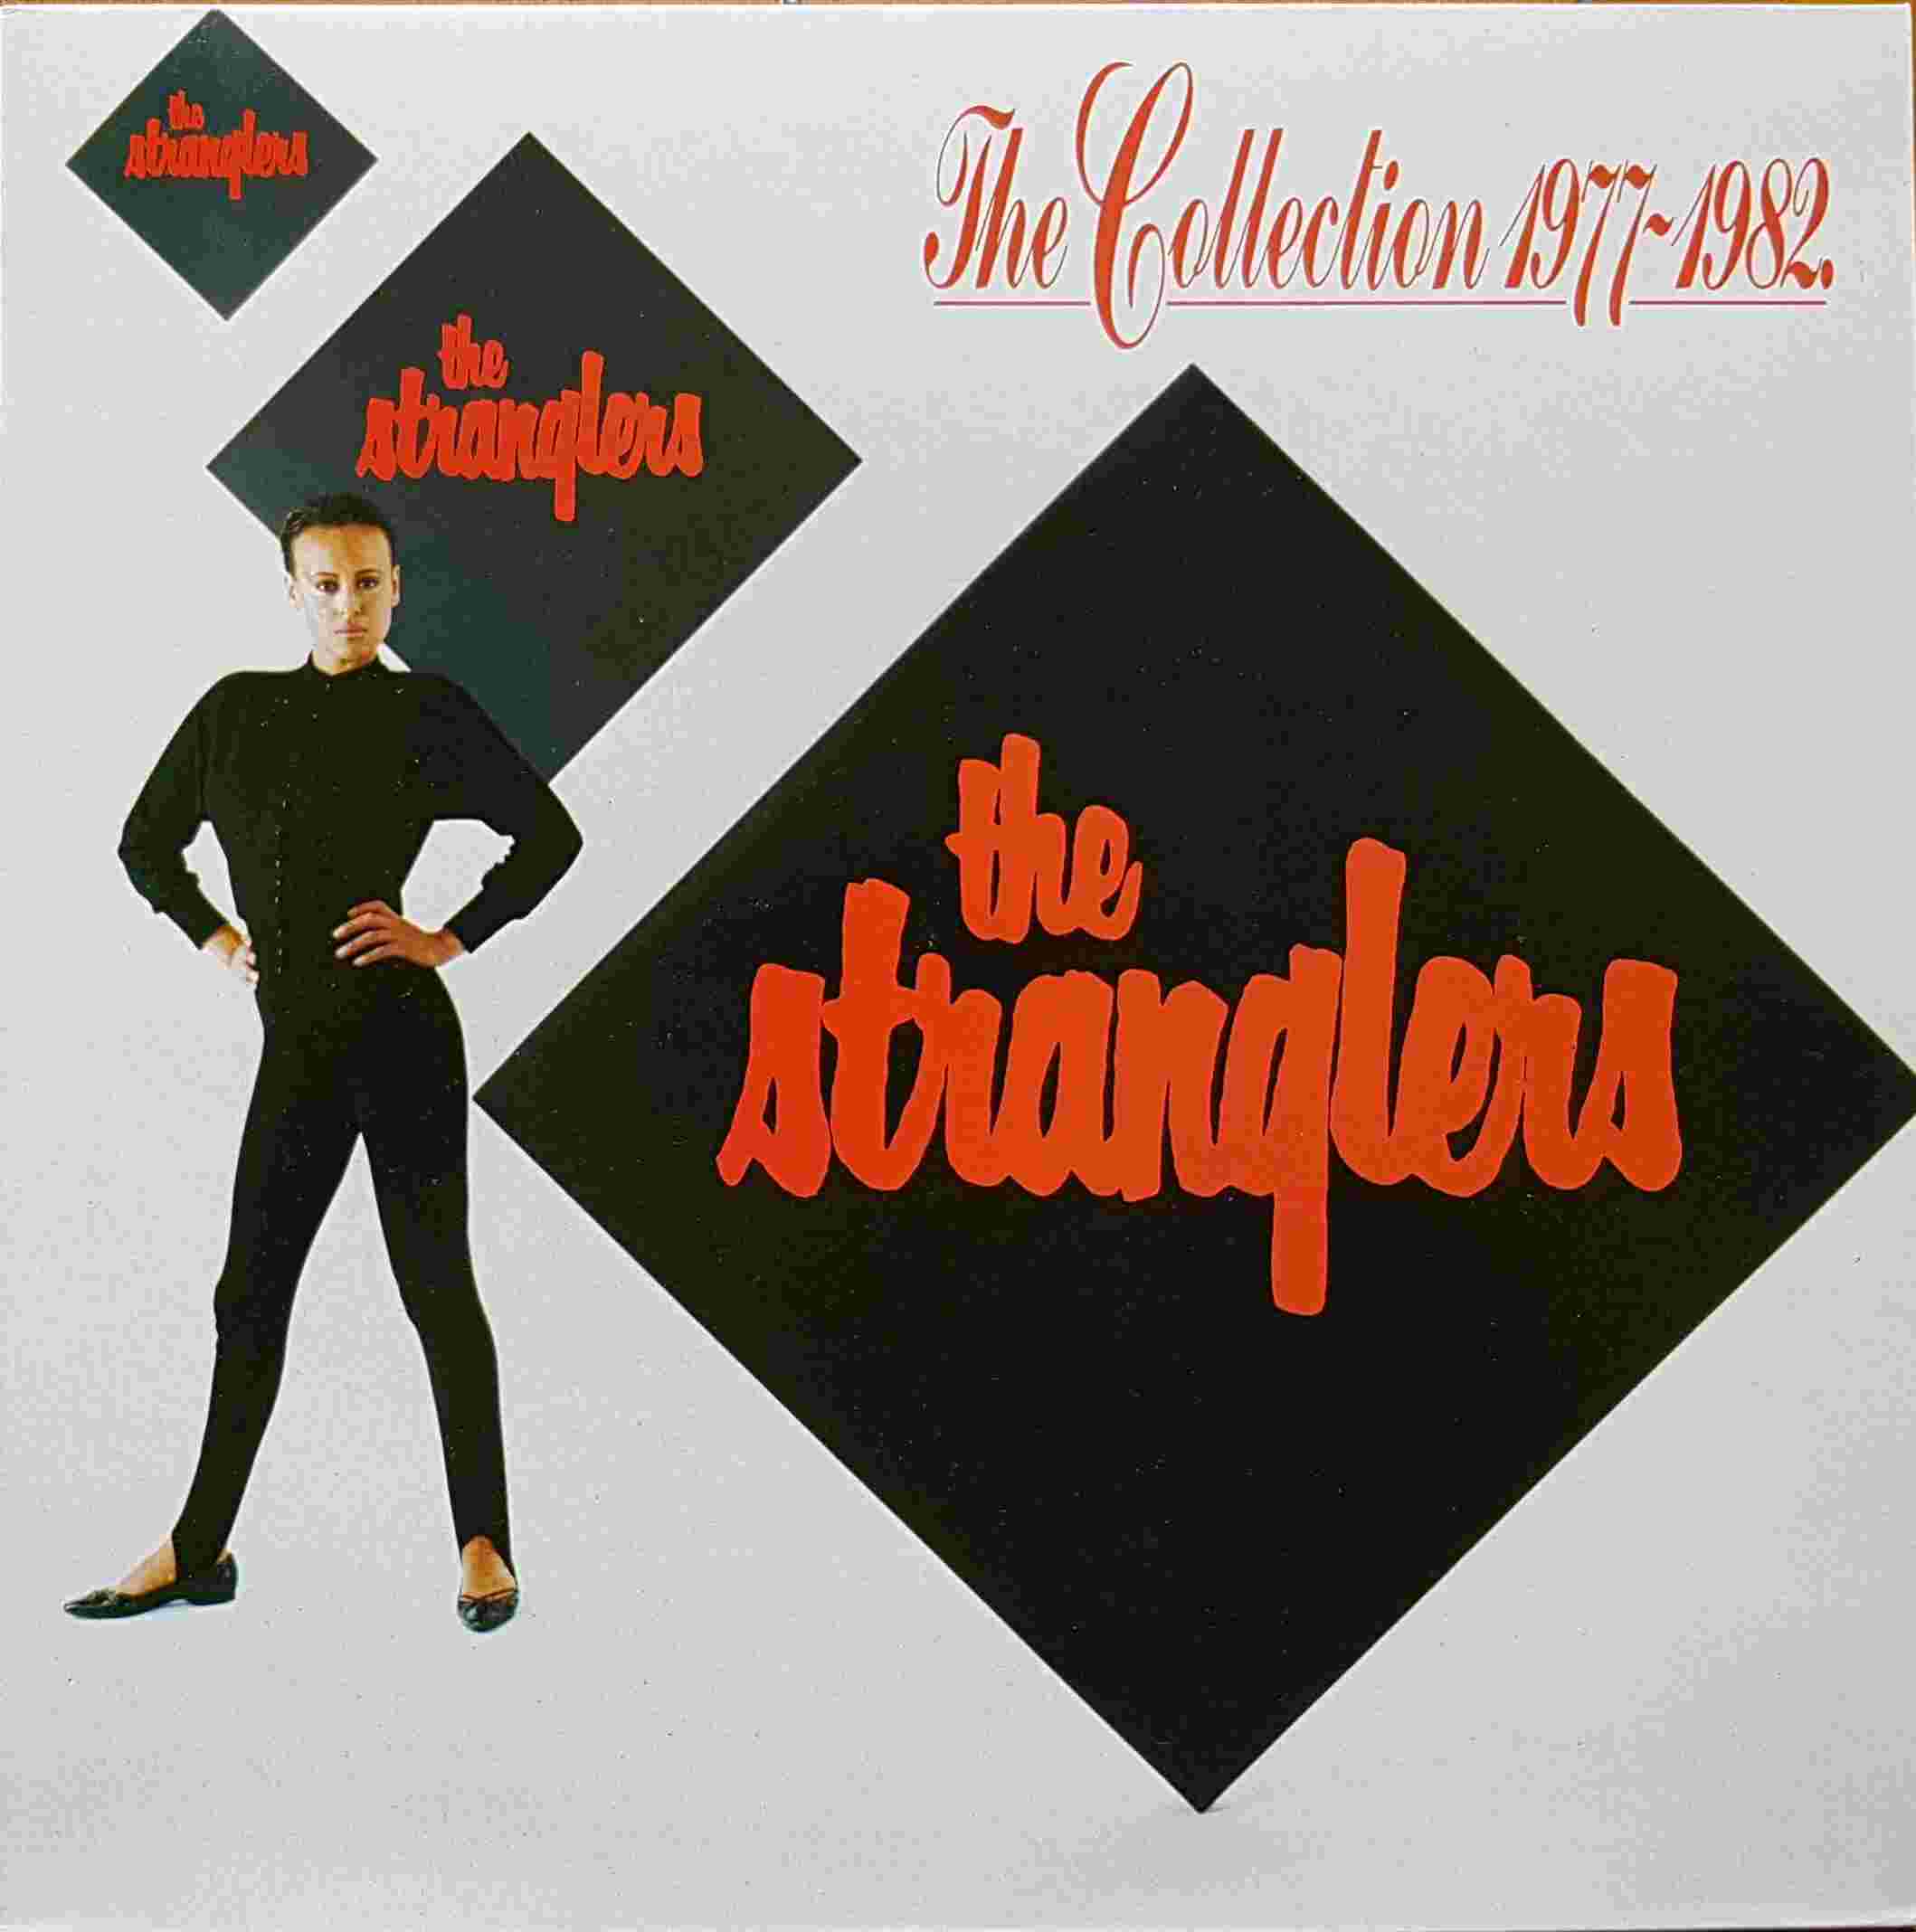 Picture of FA 3230 WL The collection 1977 - 1982 by artist The Stranglers